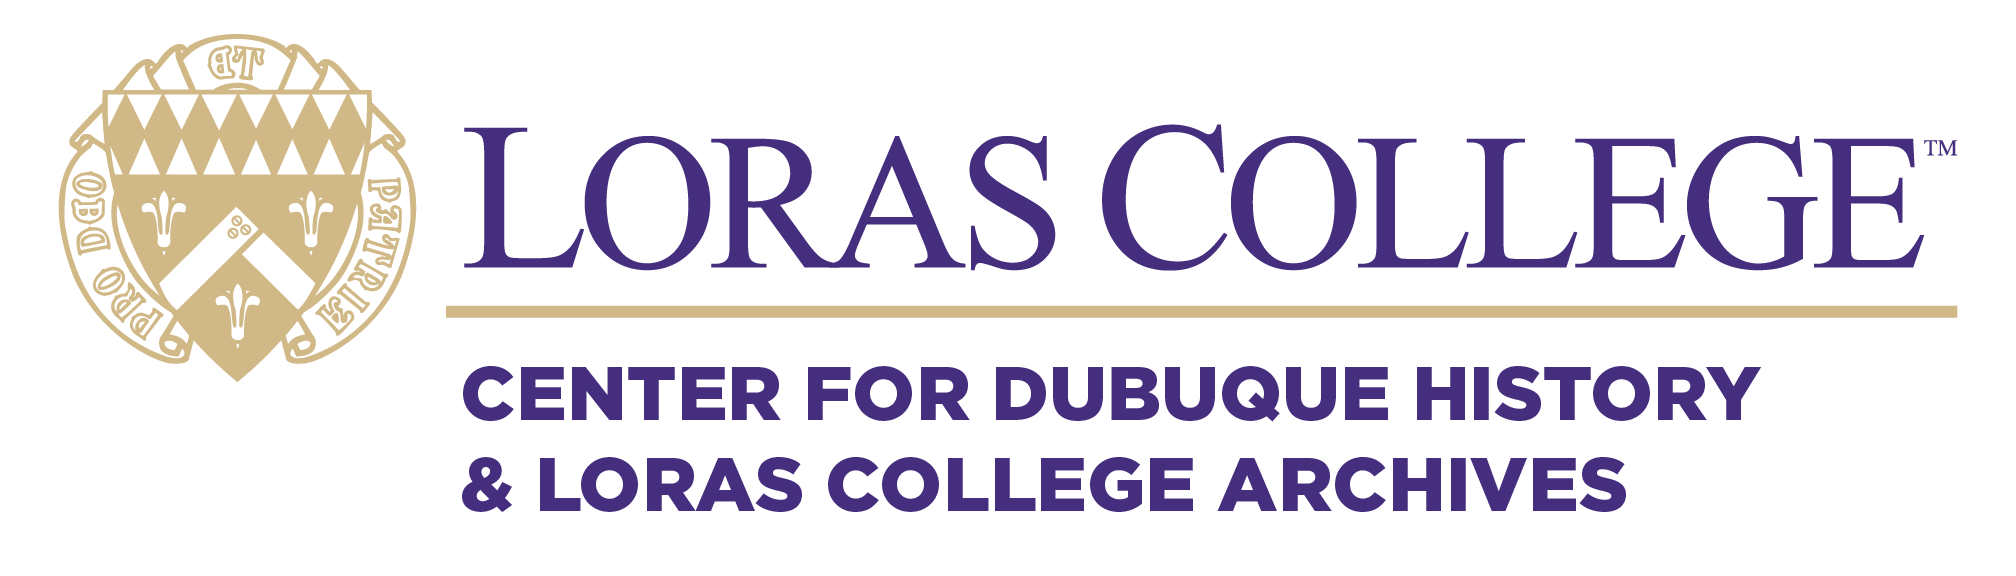 Loras College Center for Dubuque History